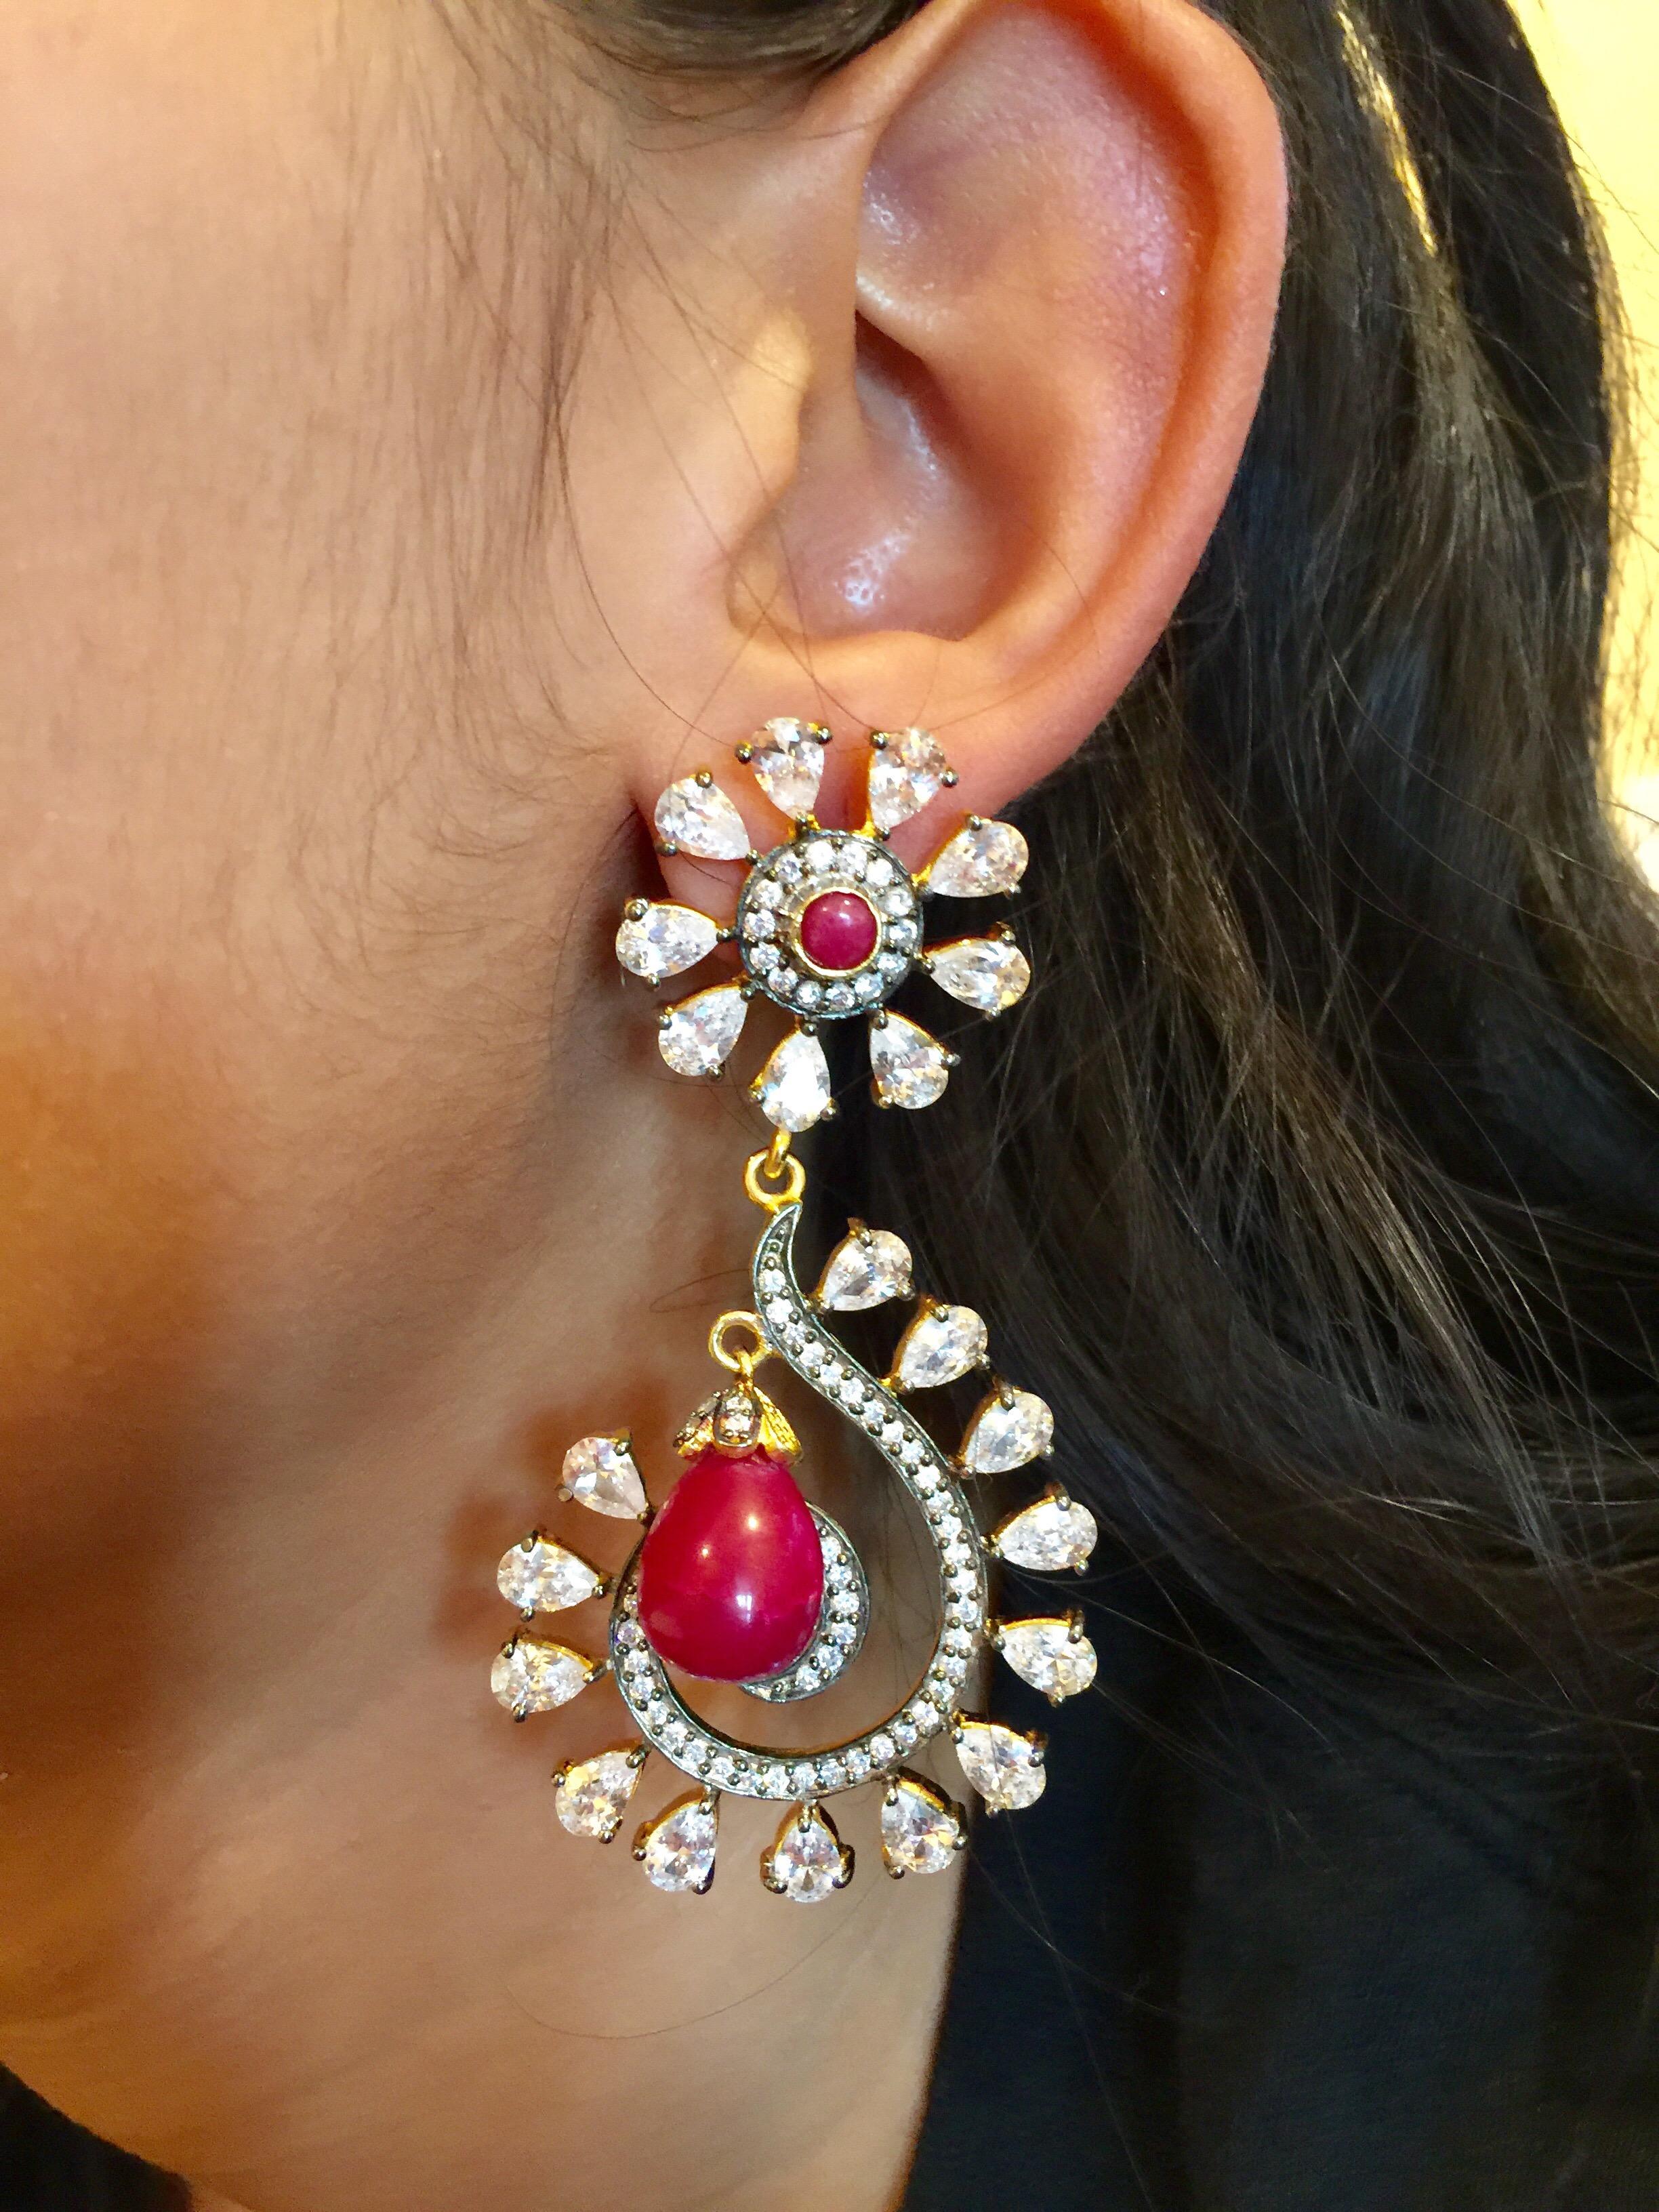 The Taj Mahal inspired design is ornate and lovely, the earrings is further enhanced by quartz stones and sparkling CZ stones overall. Earrings have a post closure for pierced ears.

Stone: Quartz, cubic zirconia

Length: 2.8 inches

Width: 1 1/2